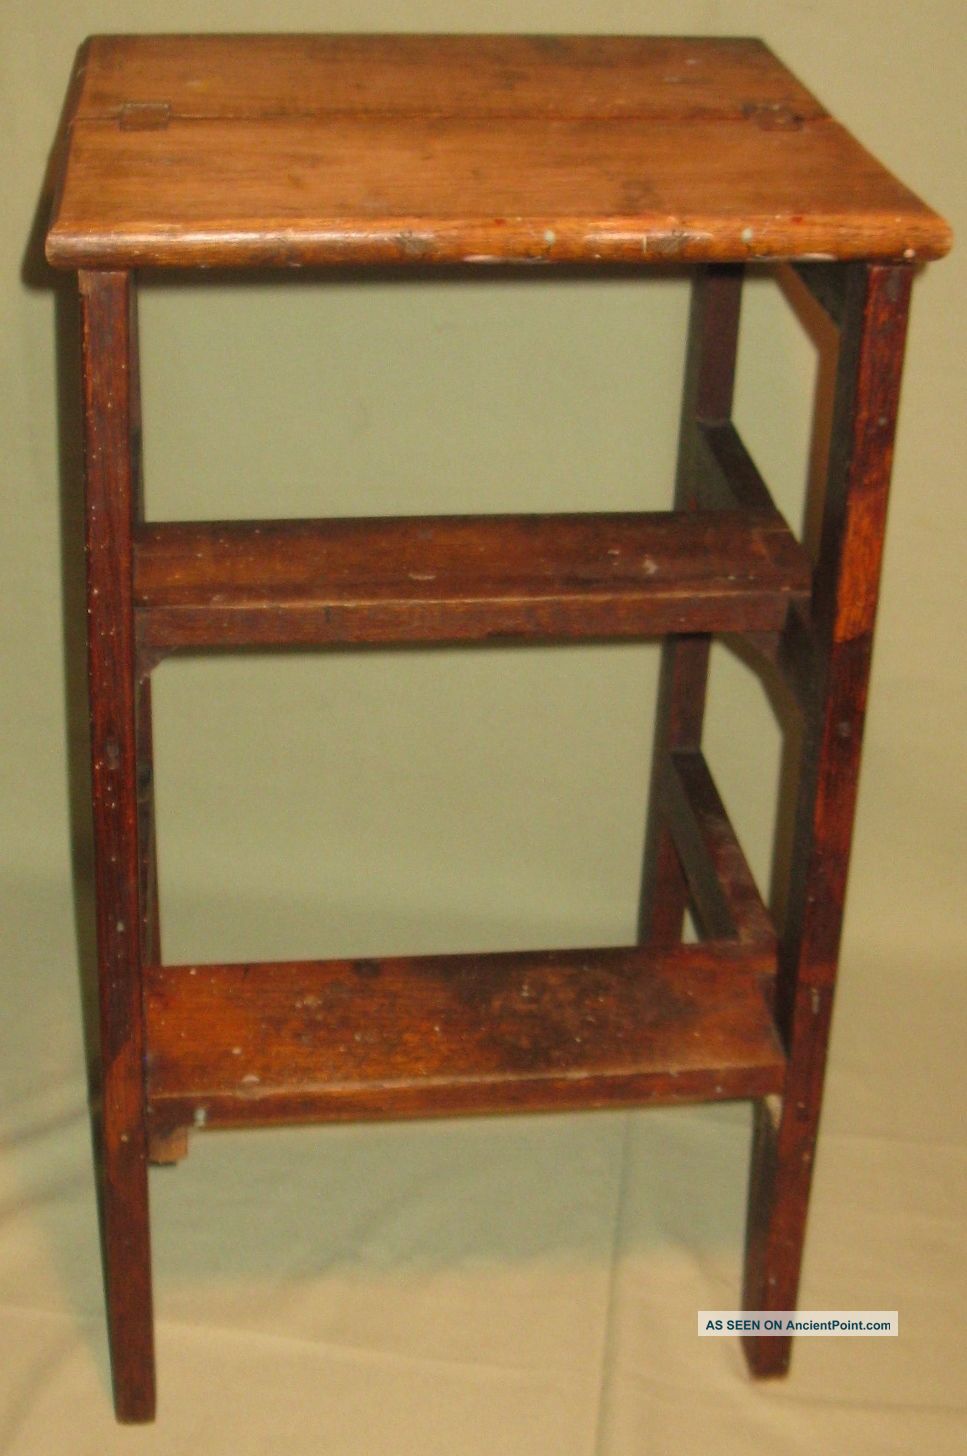 Antique Step Stool/stand/table Primitive Country Oak Finish Ca1900 1800-1899 photo